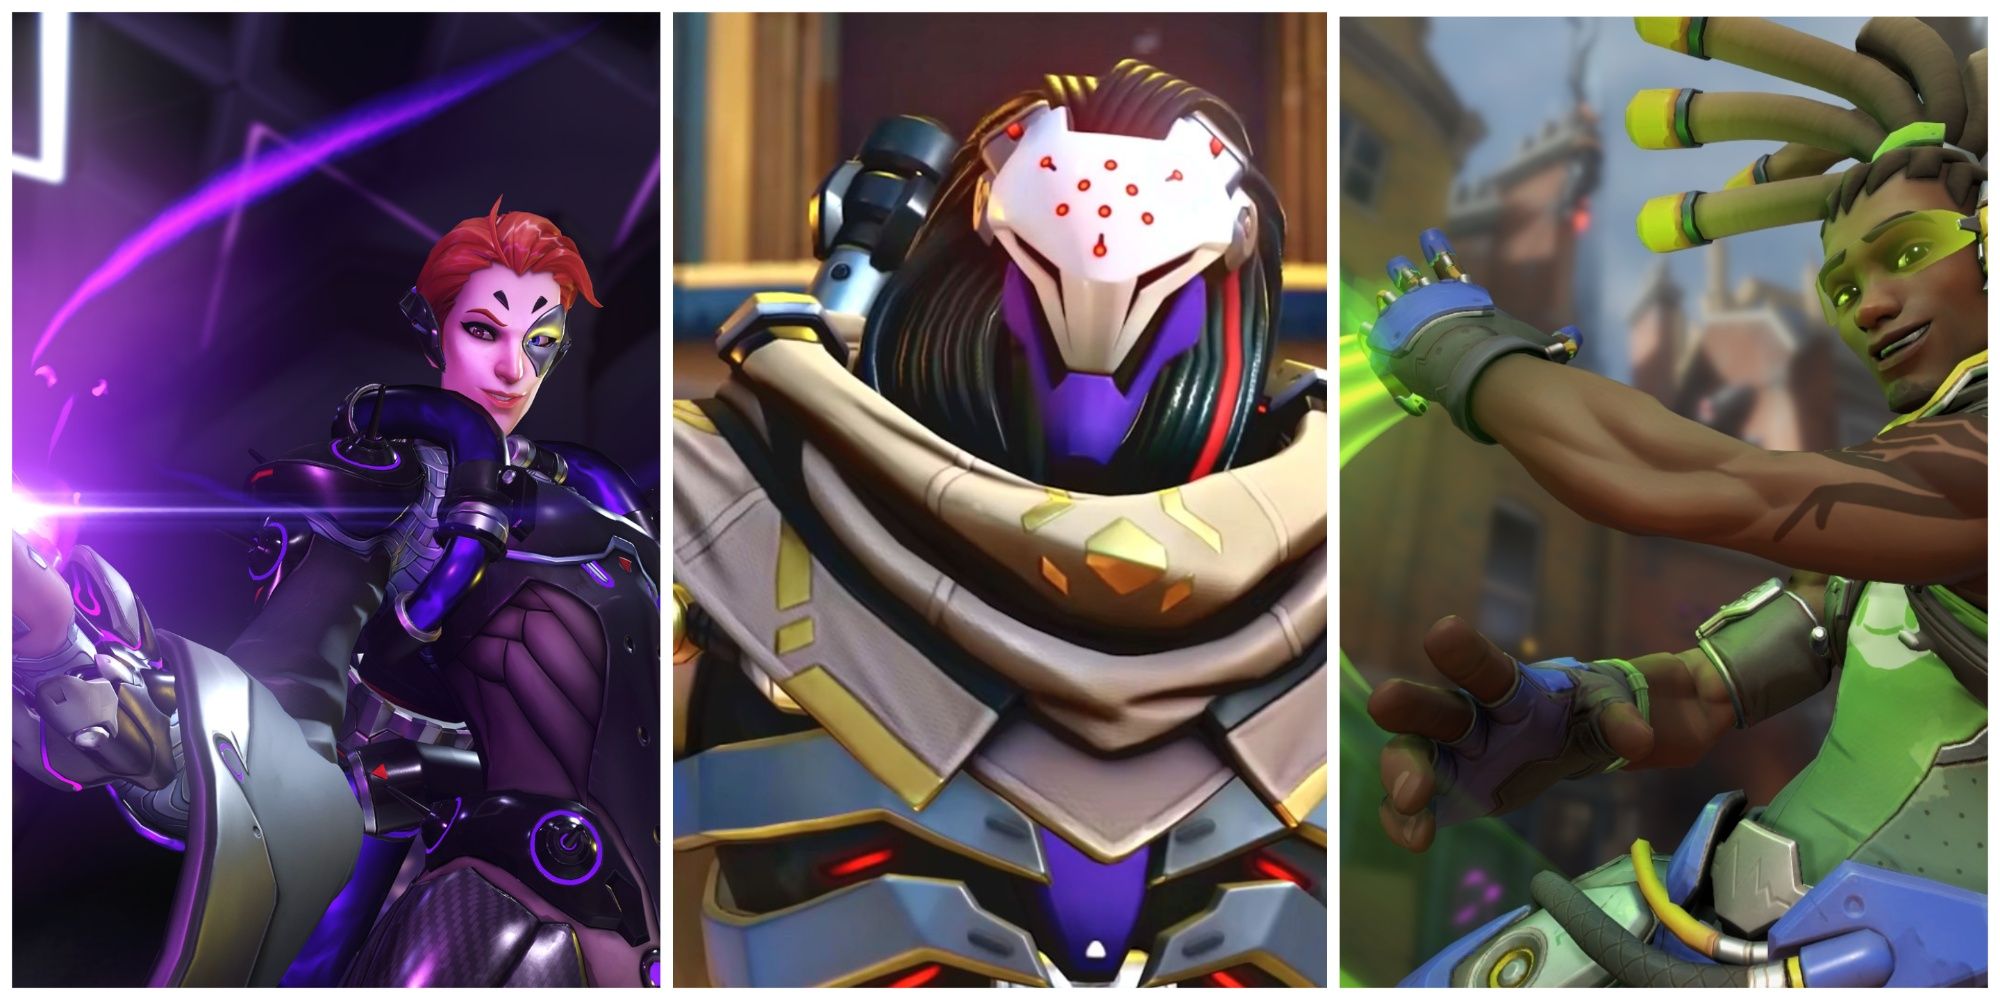 Collage of Overwatch 2 Heroes Ramattra, Moira, and Lucio